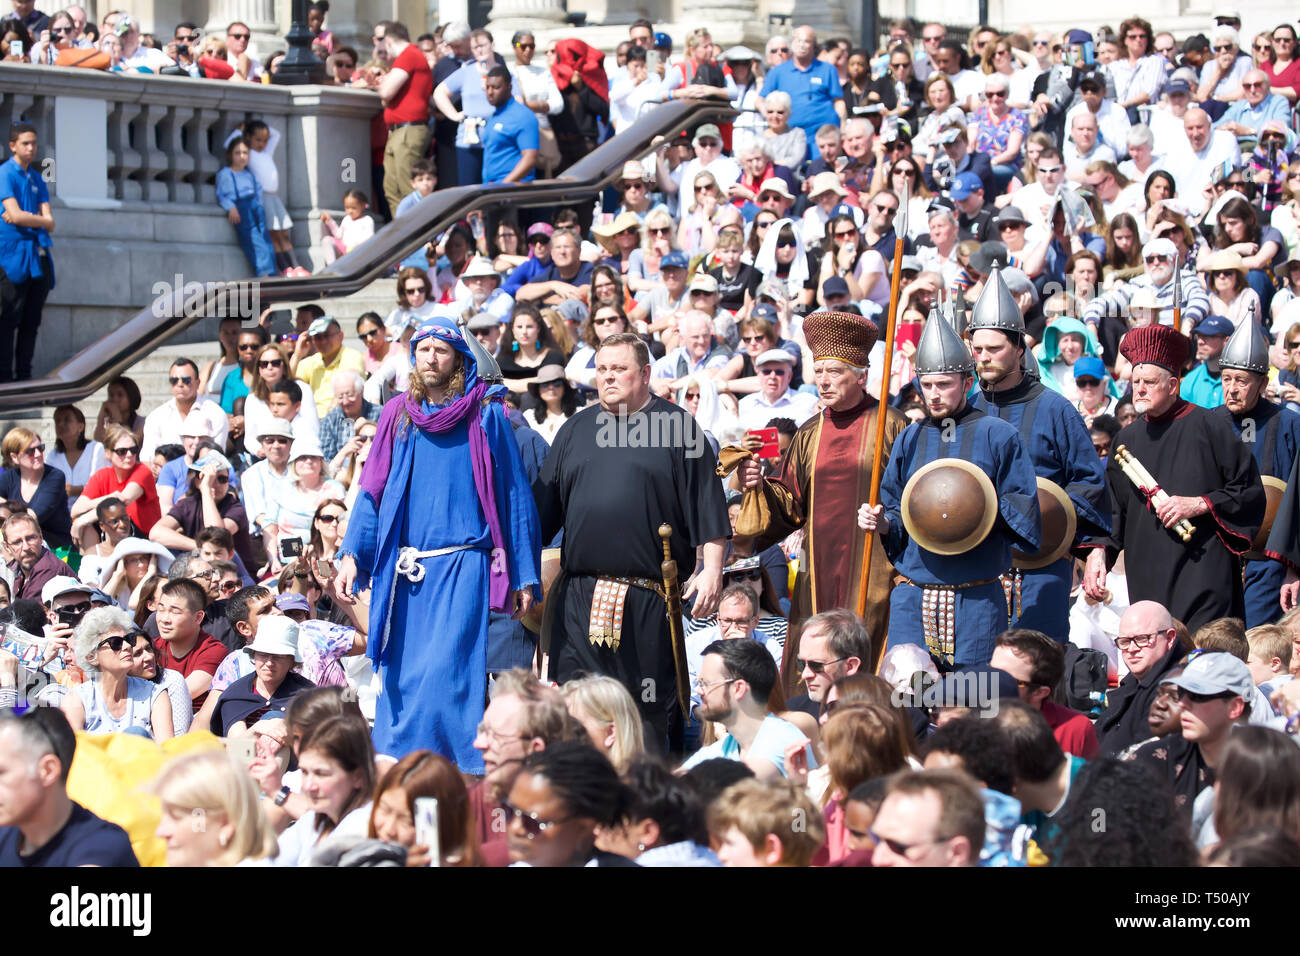 London, UK. 19th Apr, 2019. The Passion of Jesus took place in Trafalgar Square in glorious sunshine. Large crowds enjoyed a free performance with over 100 actors and volunteers from the Wintershall Players which commemorates the day Jesus is believed to have been arrested, tried and crucified. Credit: Keith Larby/Alamy Live News Stock Photo